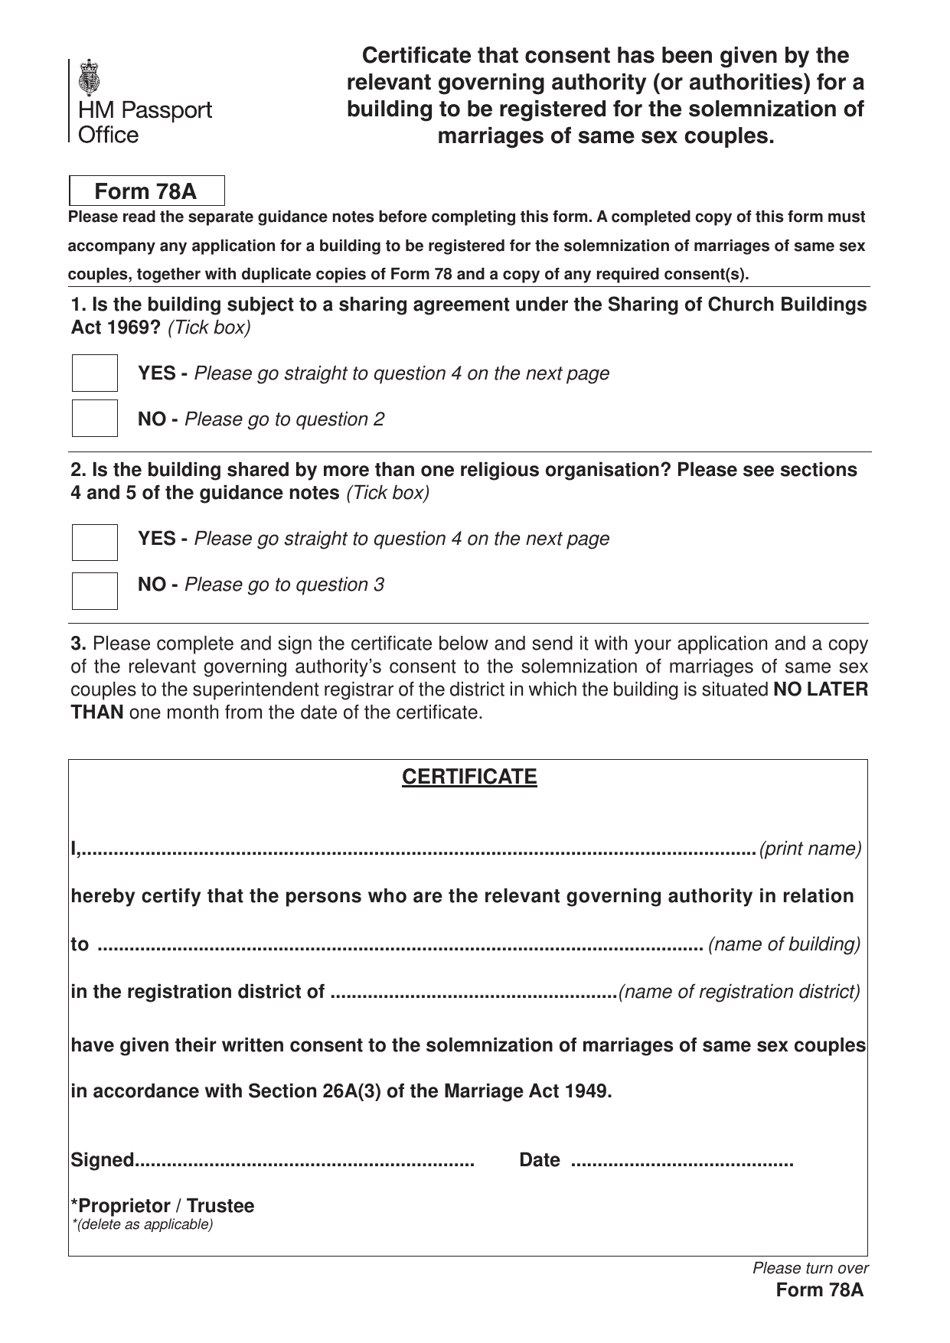 Form 78A Certificate That Consent Has Been Given by the Relevant Governing Authority (Or Authorities) for a Building to Be Registered for the Solemnization of Marriages of Same Sex Couples - United Kingdom, Page 1